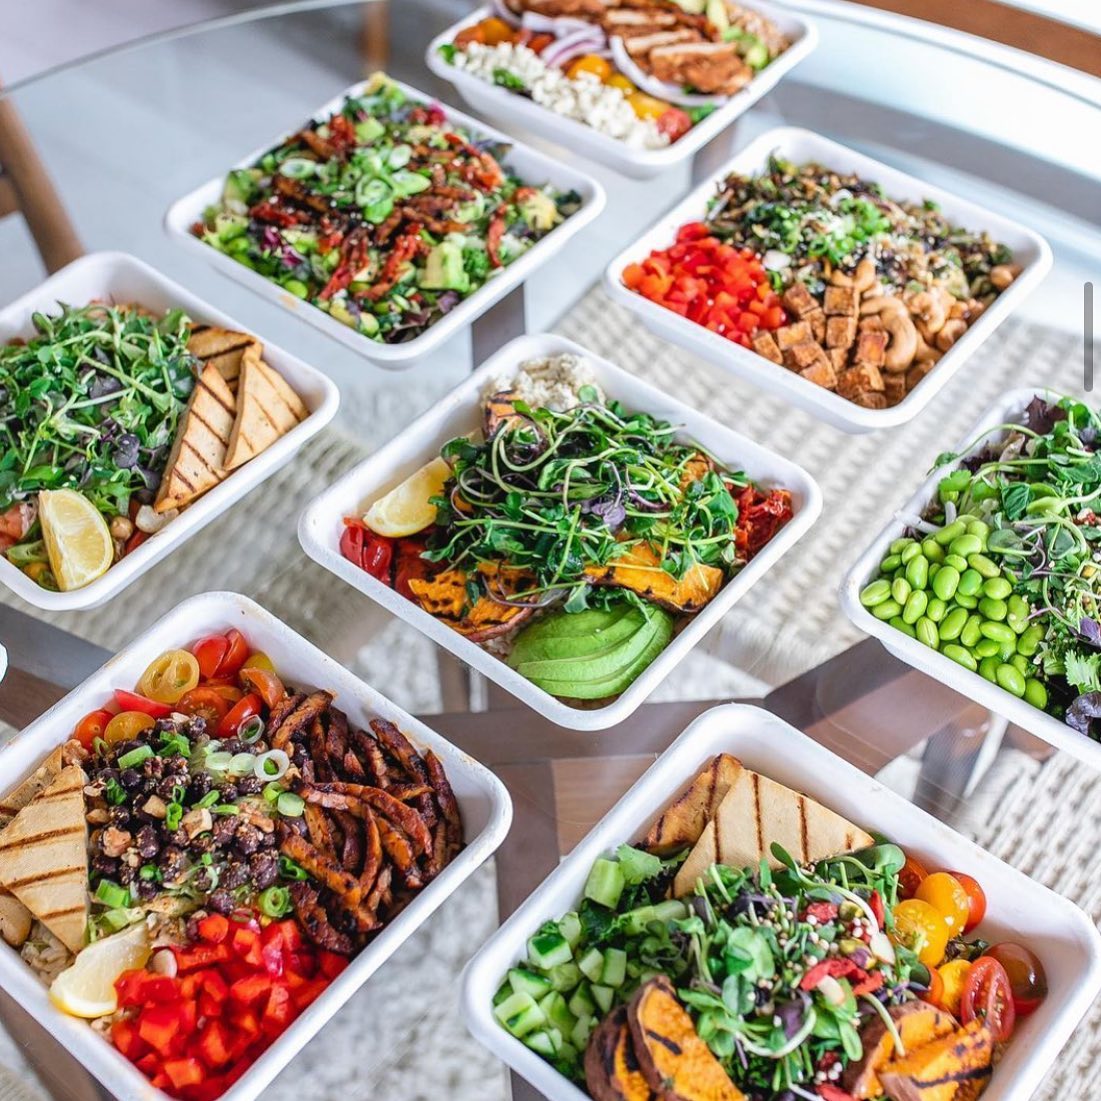 Restaurants Across Canada Offering Strictly Vegetarian Fare for Takeout